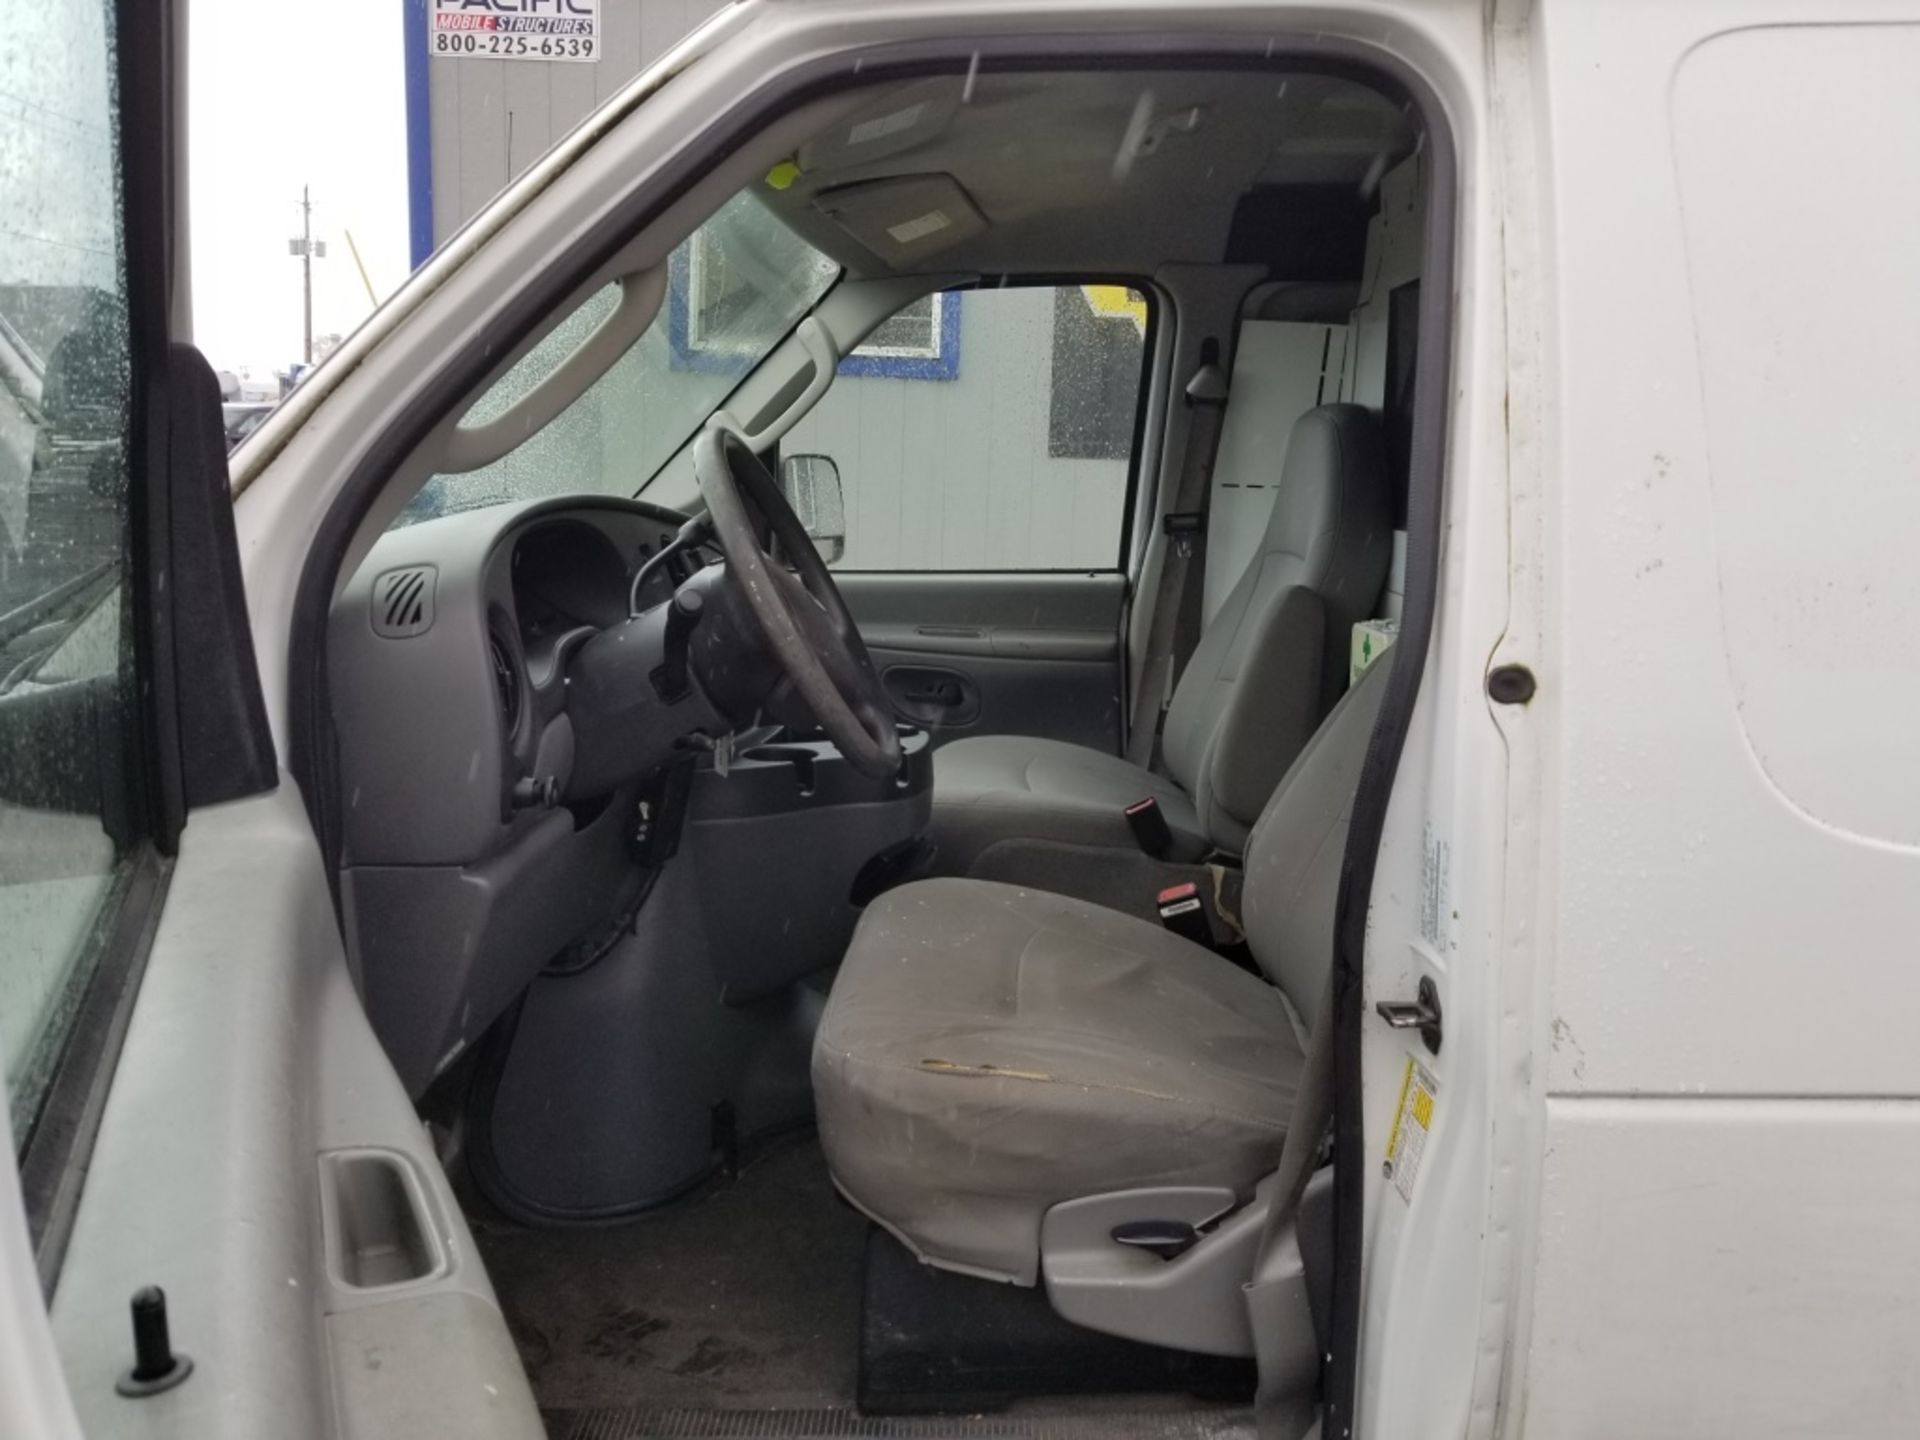 2006 Ford E350 SD Cargo Van - Image 10 of 16